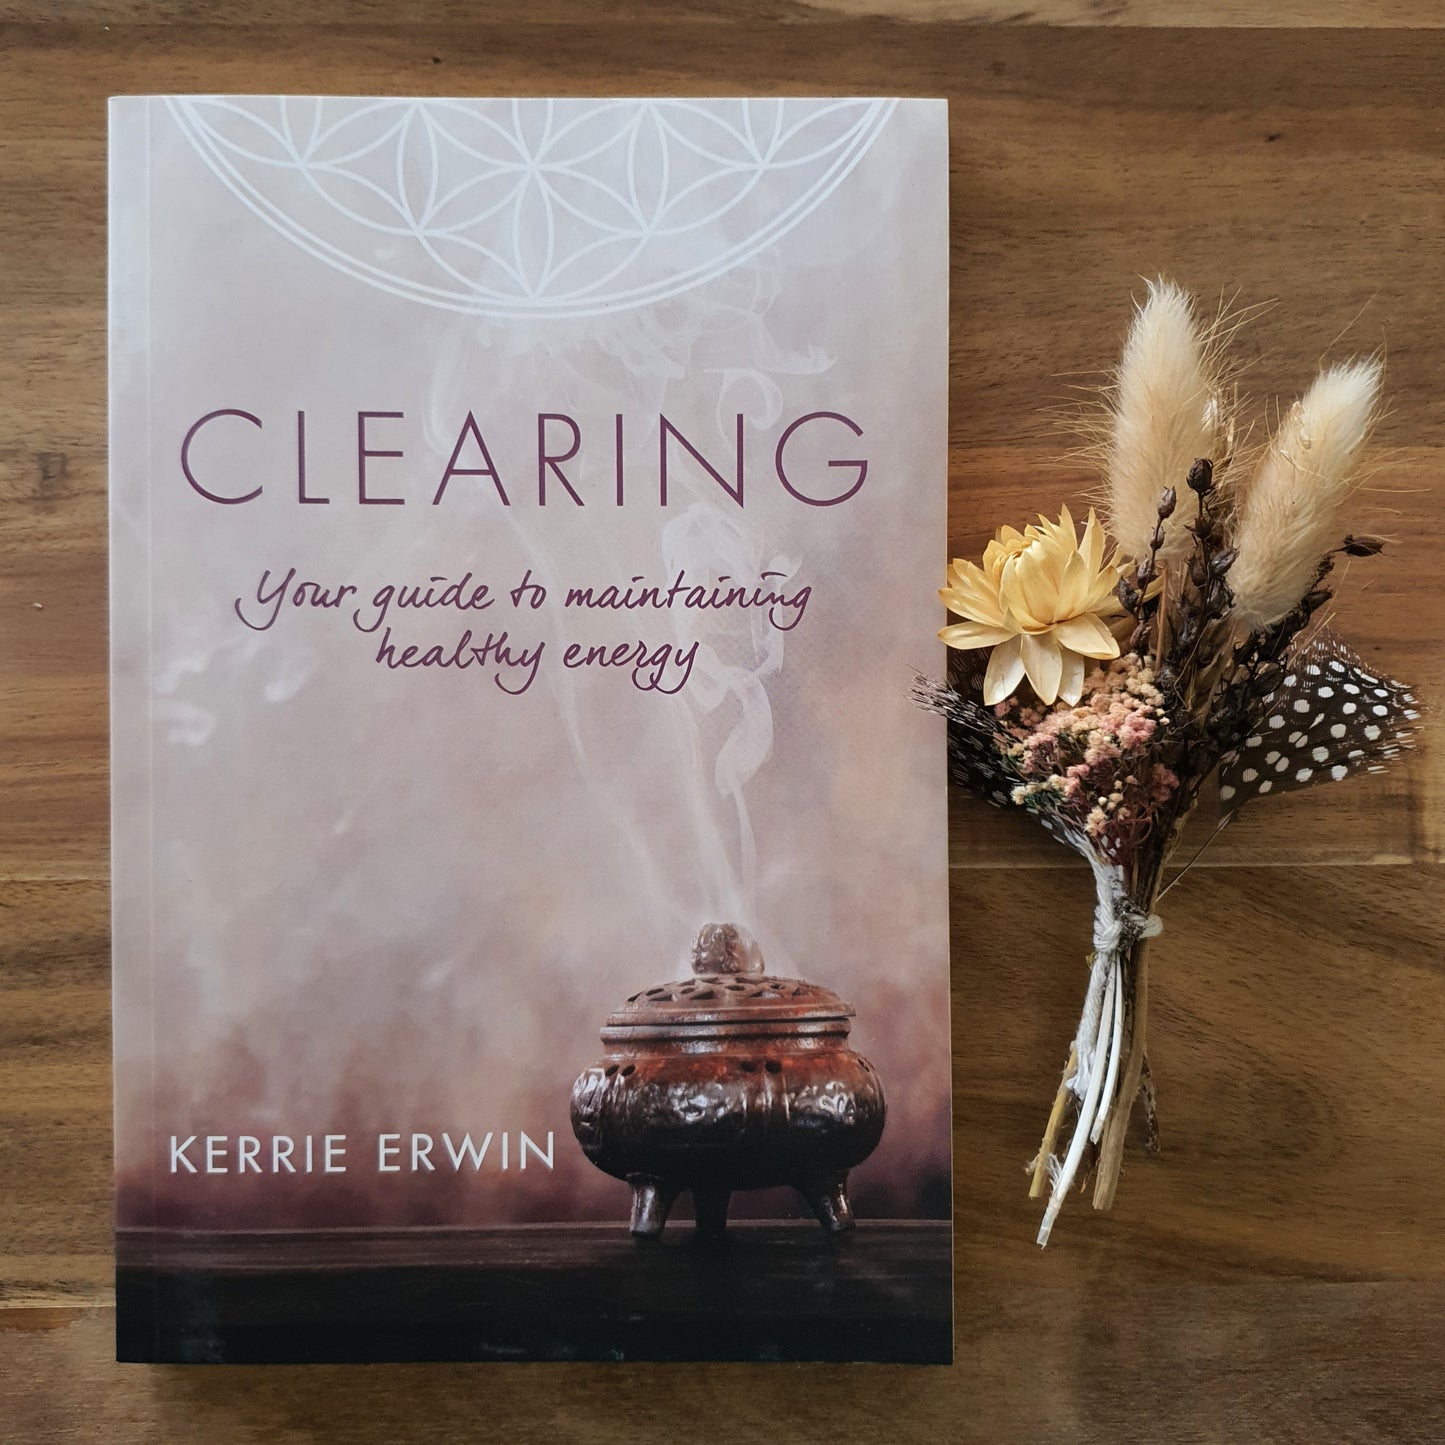 Clearing: Your guide to maintaining energy